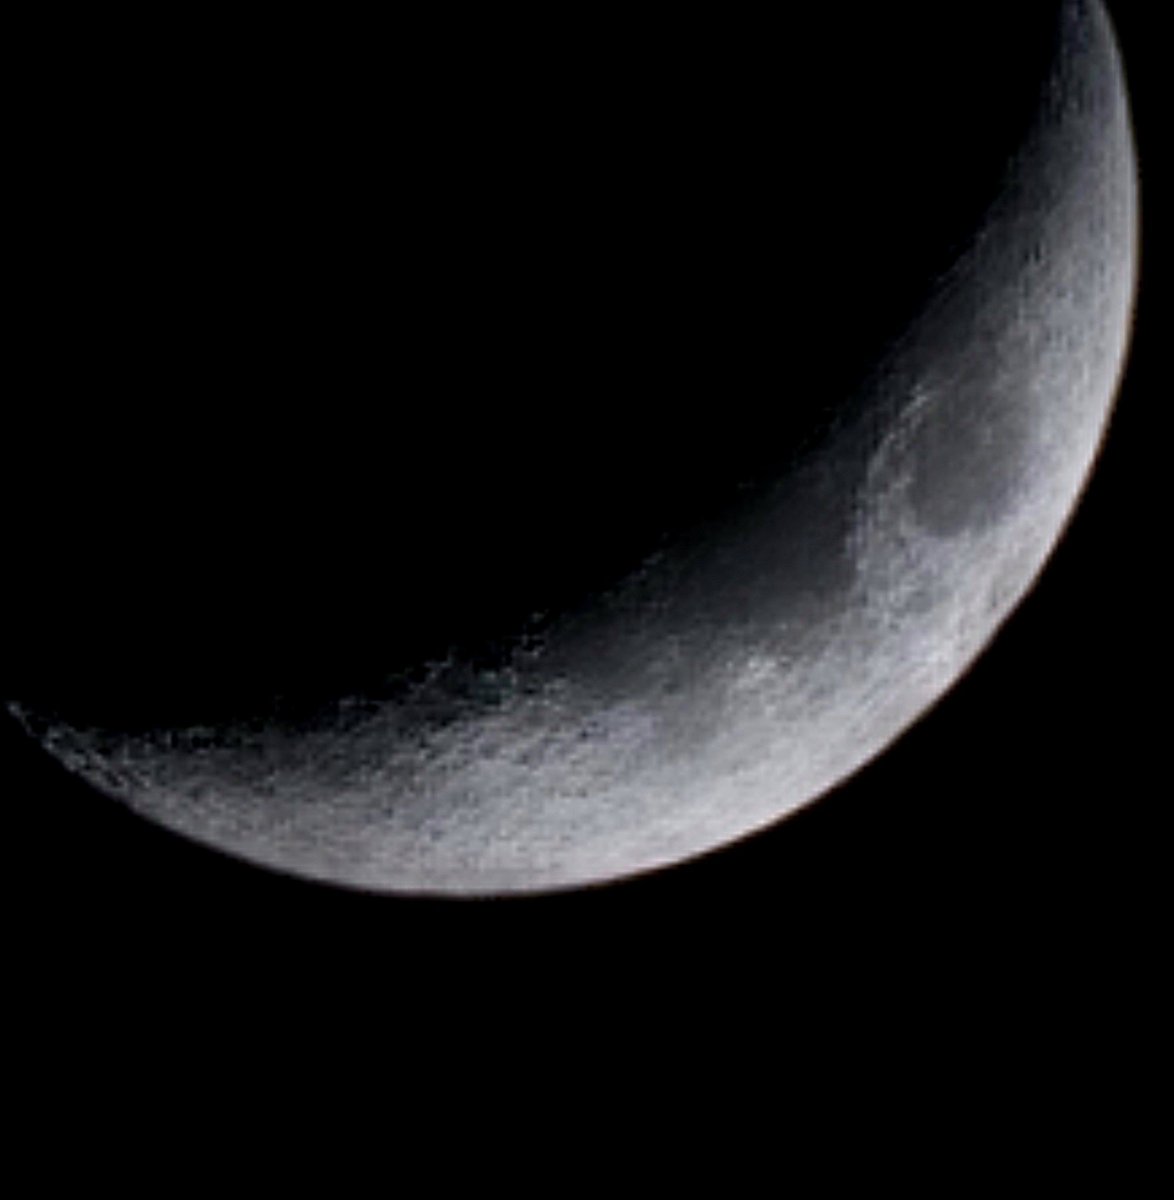 Waxing crescent moon this evening.